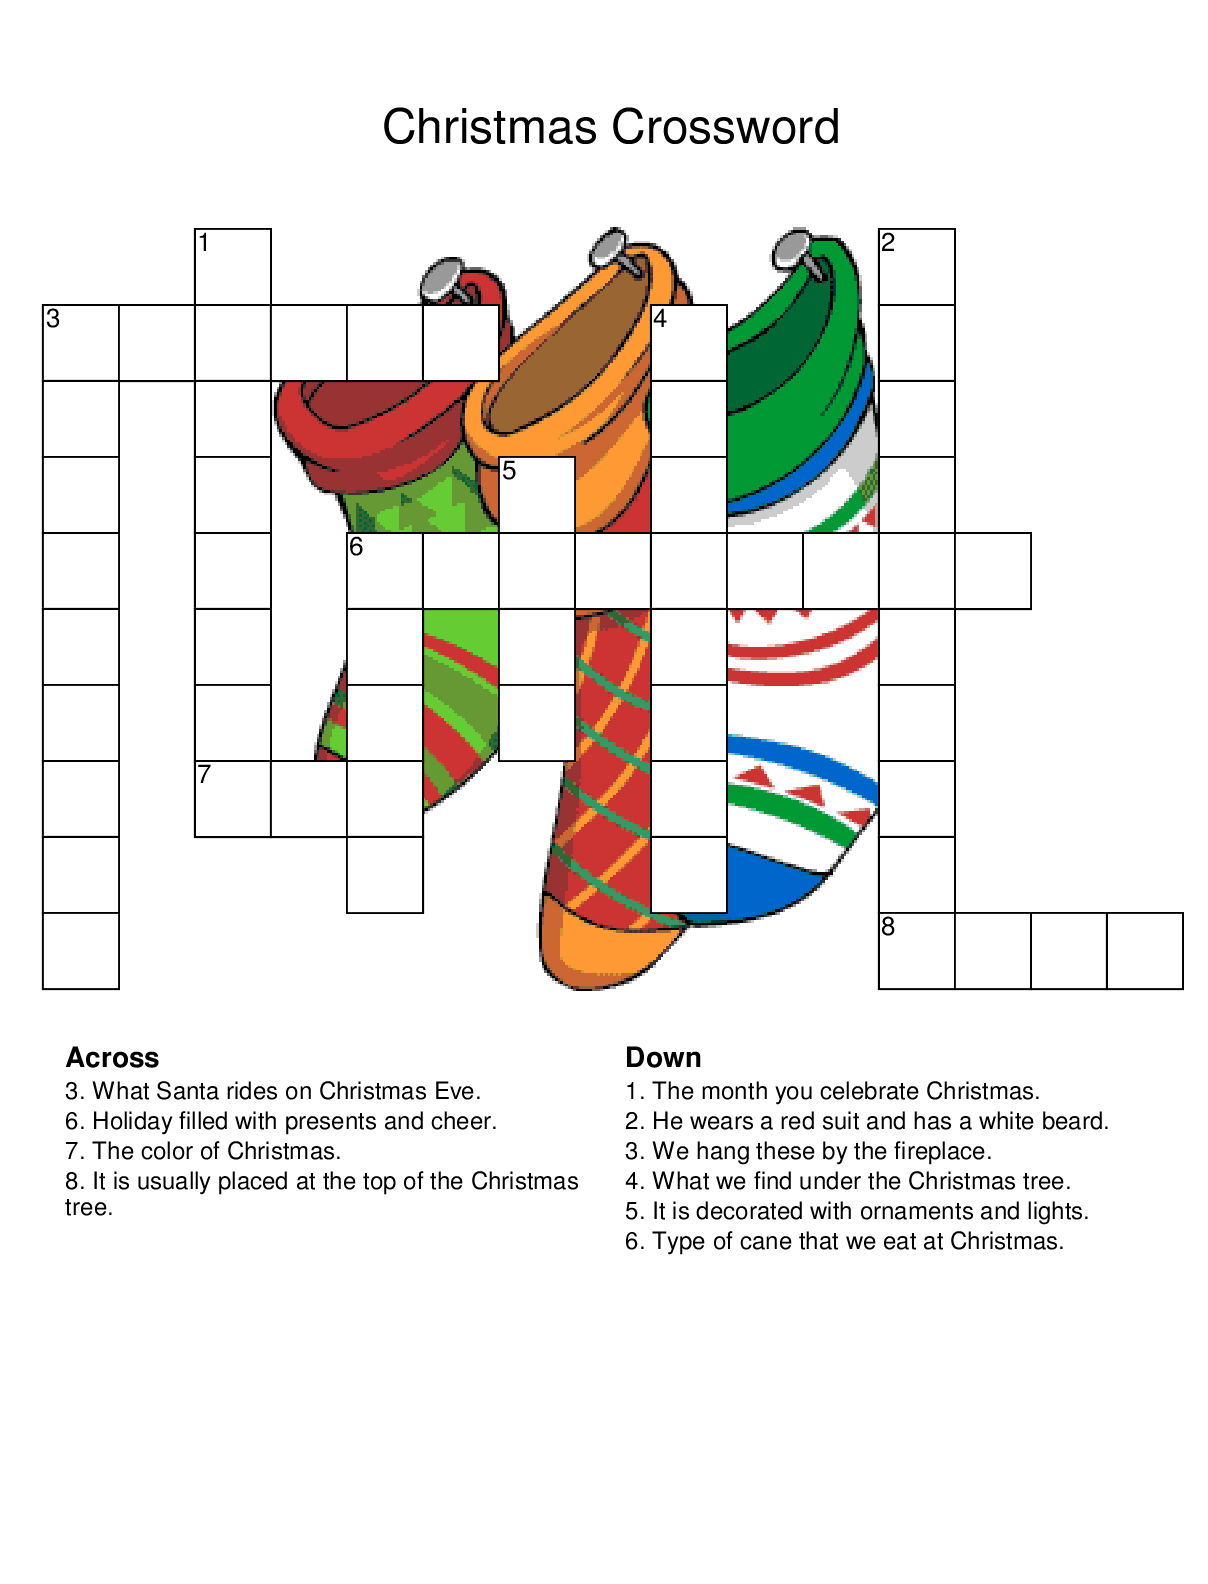 Christmas Crossword Puzzles - Best Coloring Pages For Kids - Holiday Crossword Puzzles Printable